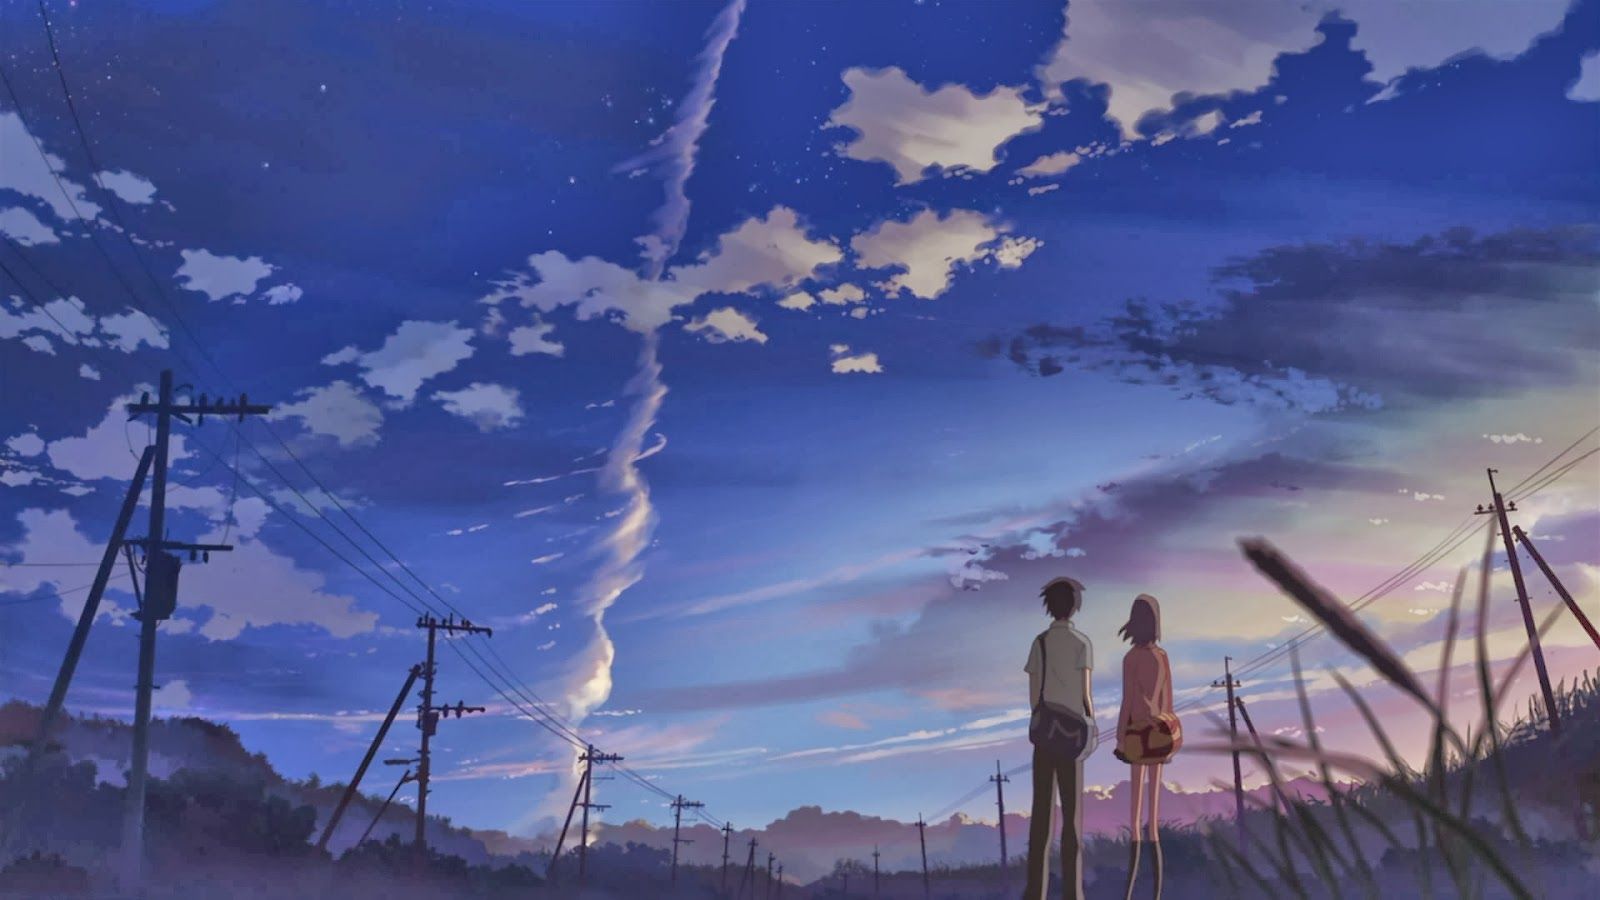 Free download FREE HD WALLPAPER DOWNLOAD 5 Centimeters Per Second.